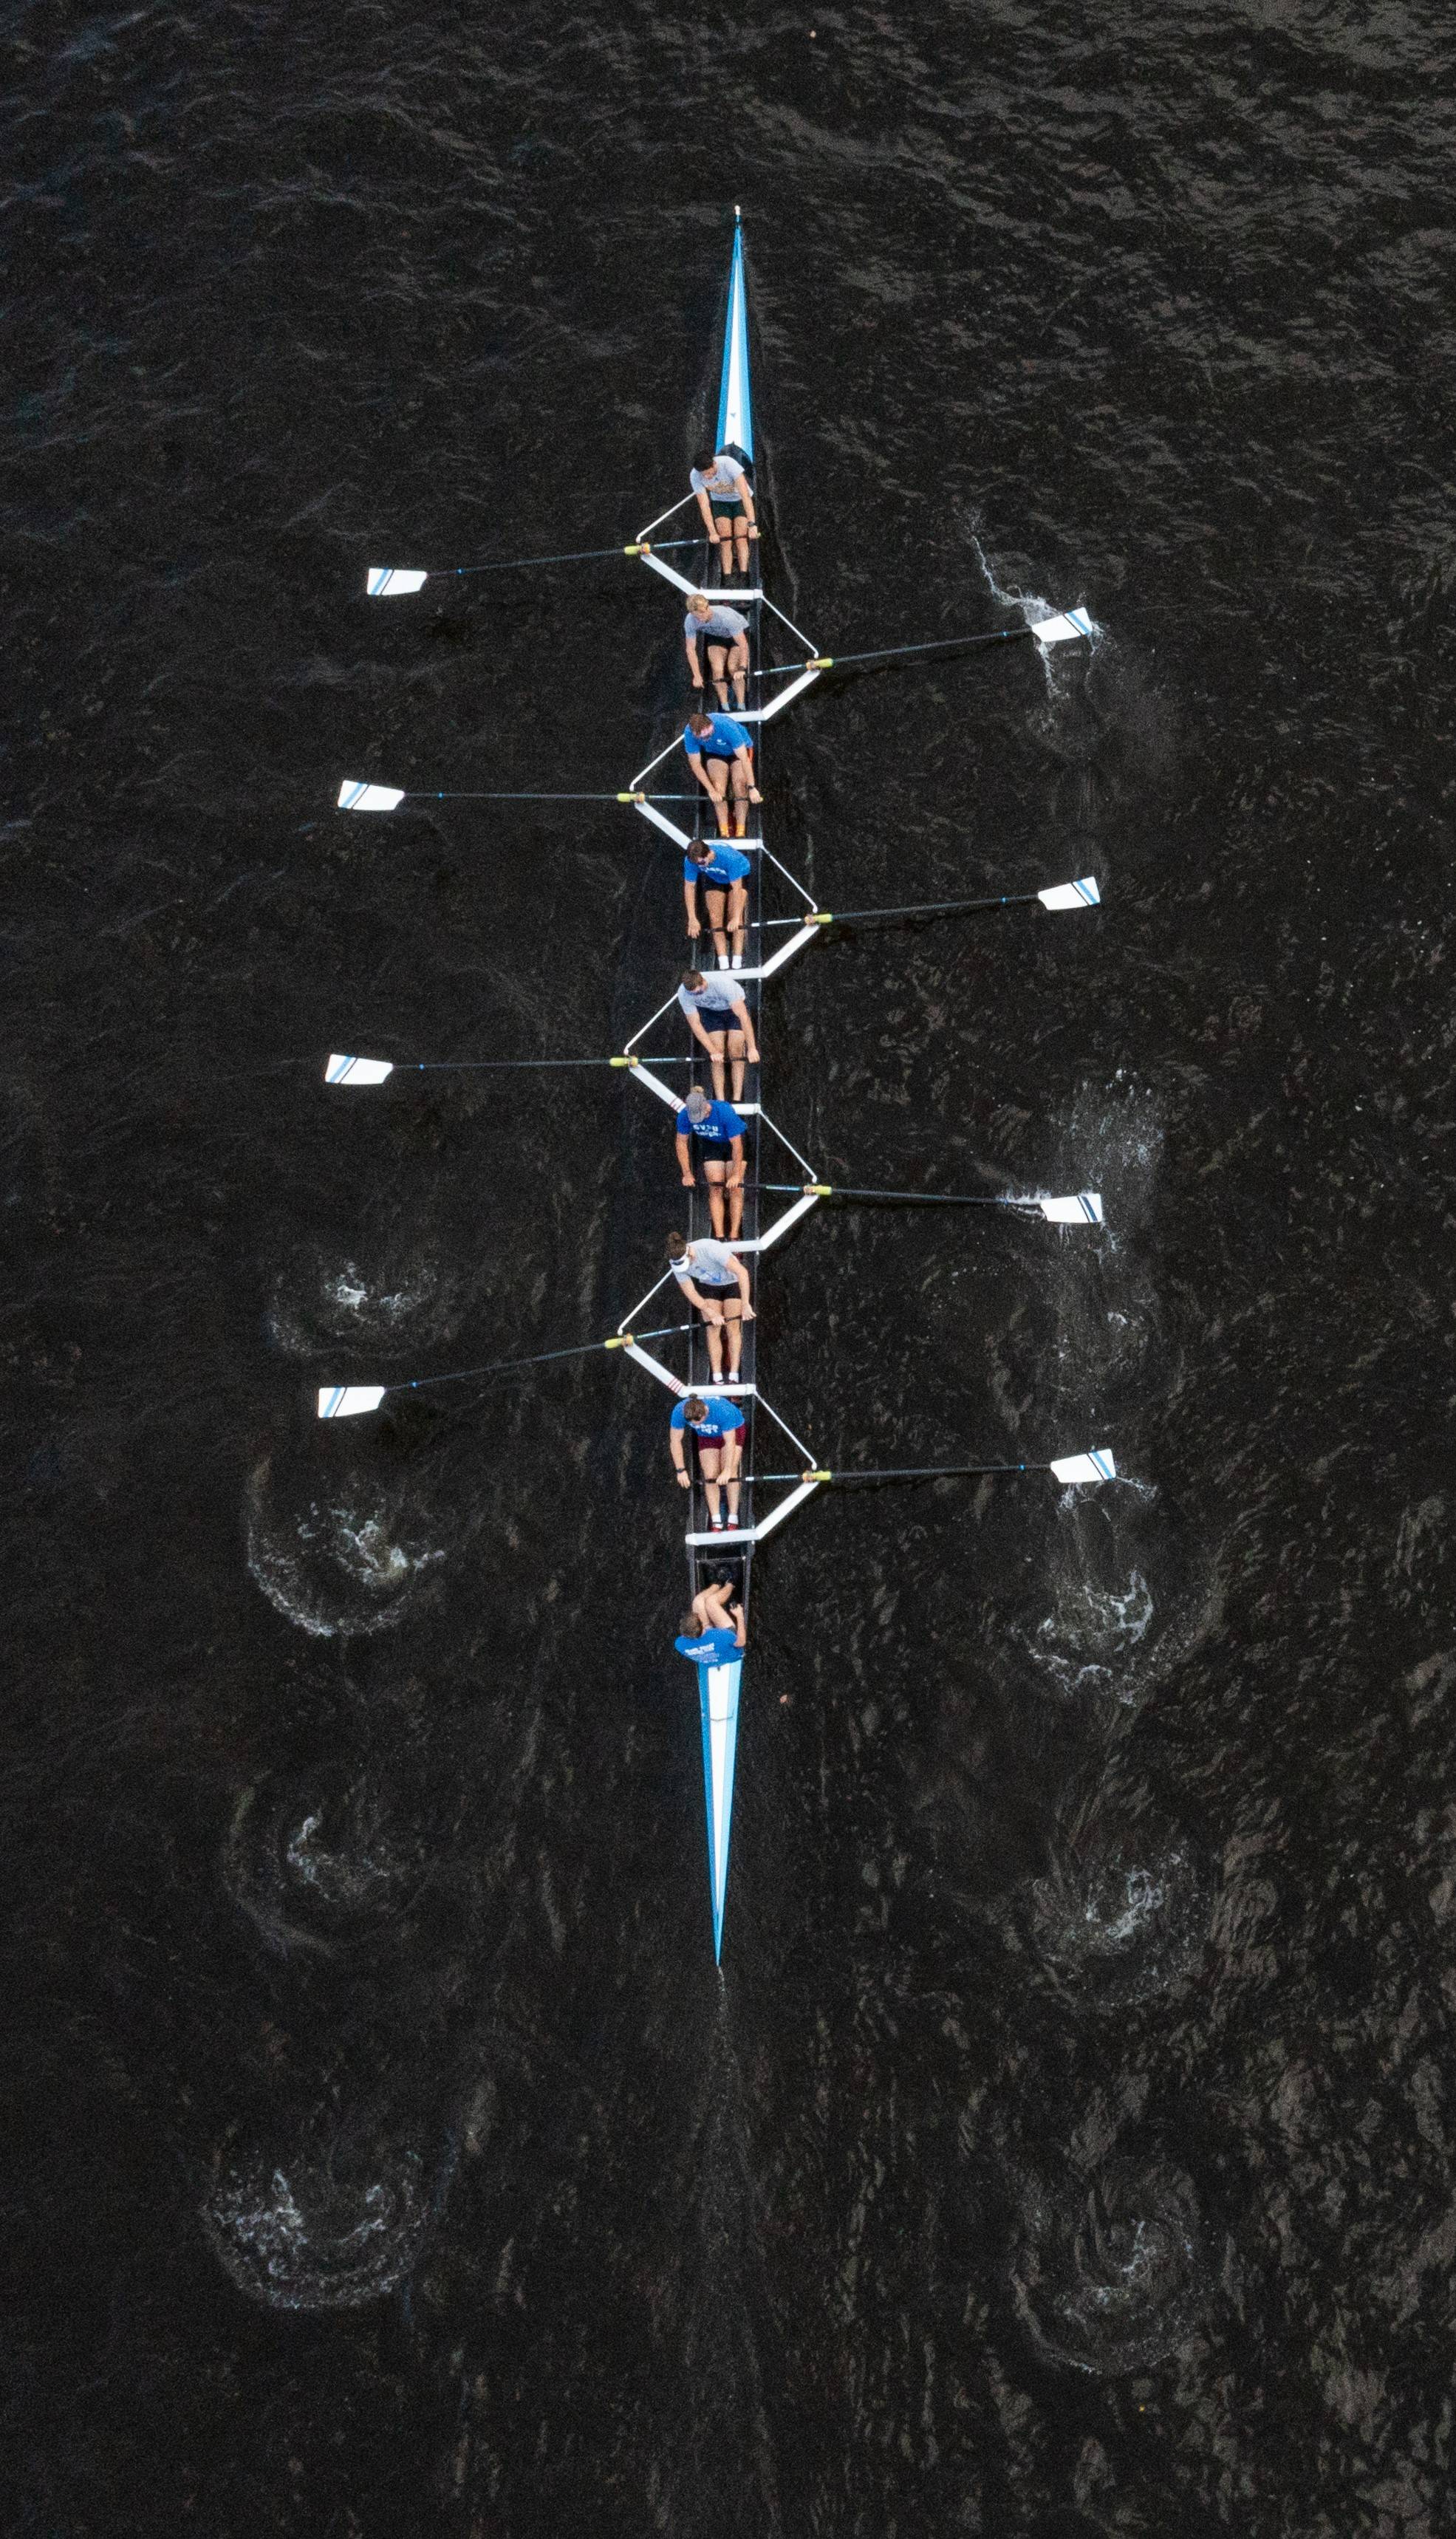 Aerial shot of the rowing team with an eight man boat practicing on the Grand River